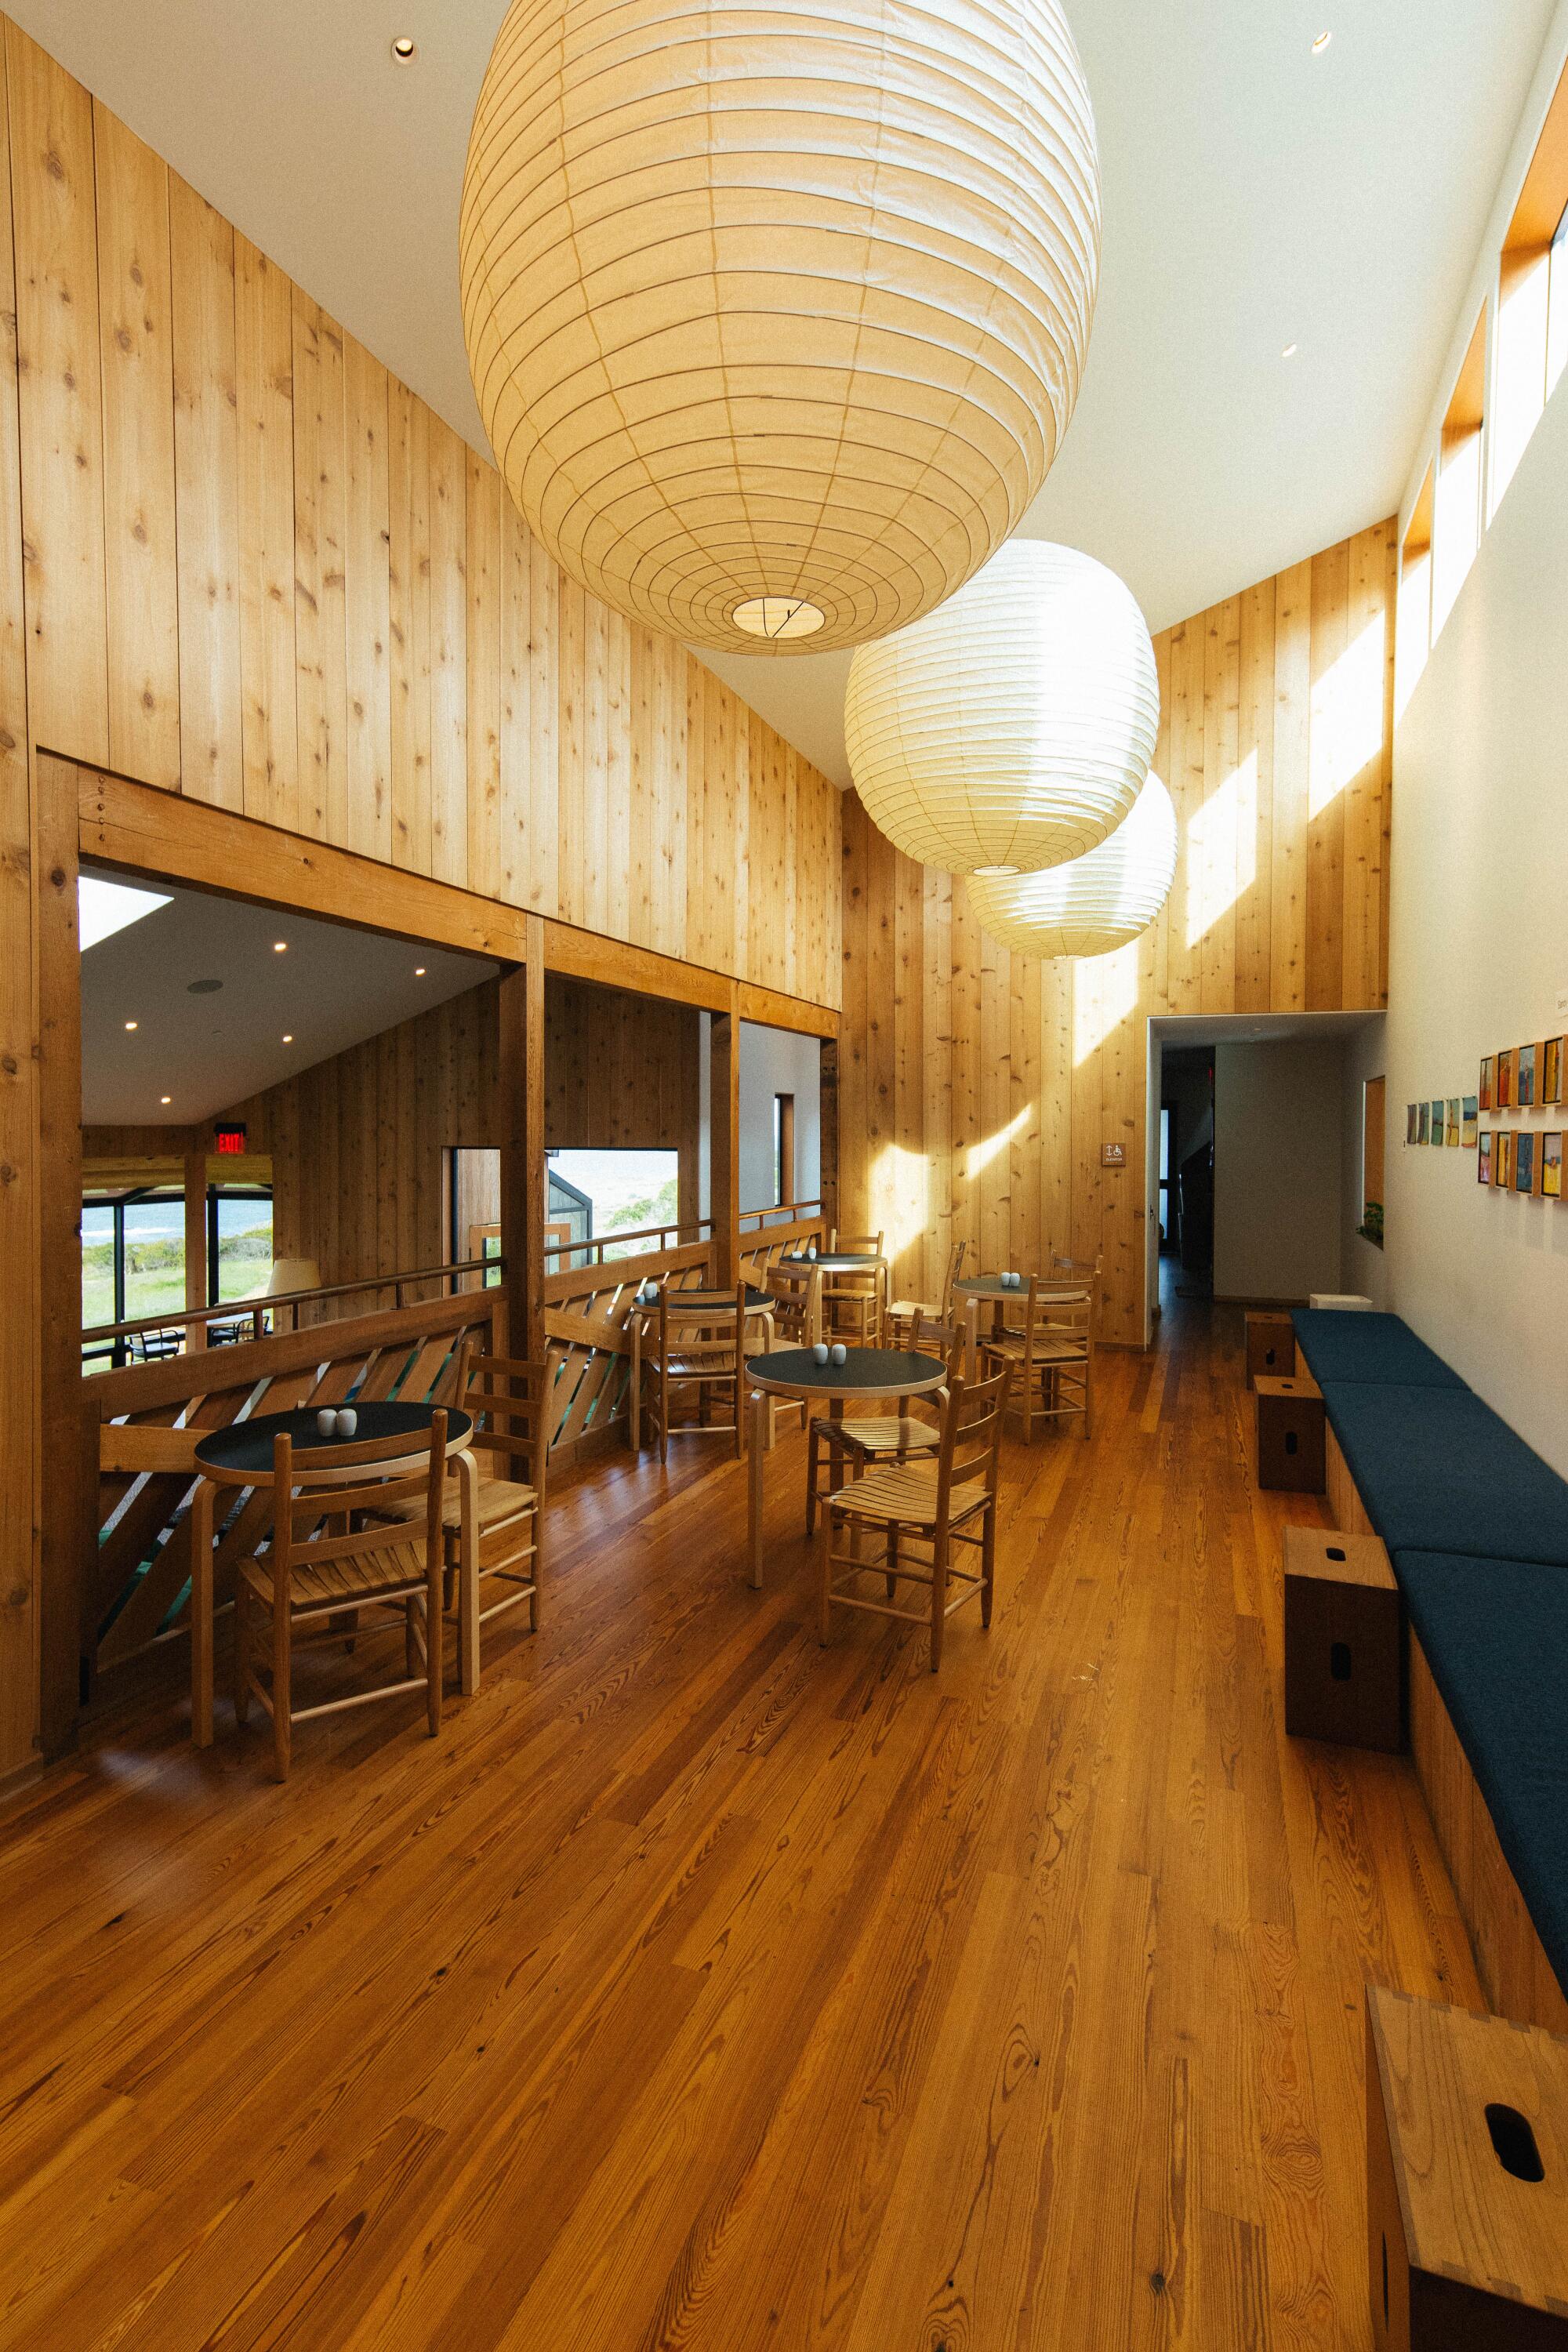 A room with wood walls and floor, tables and chairs, and large hanging paper light fixtures.